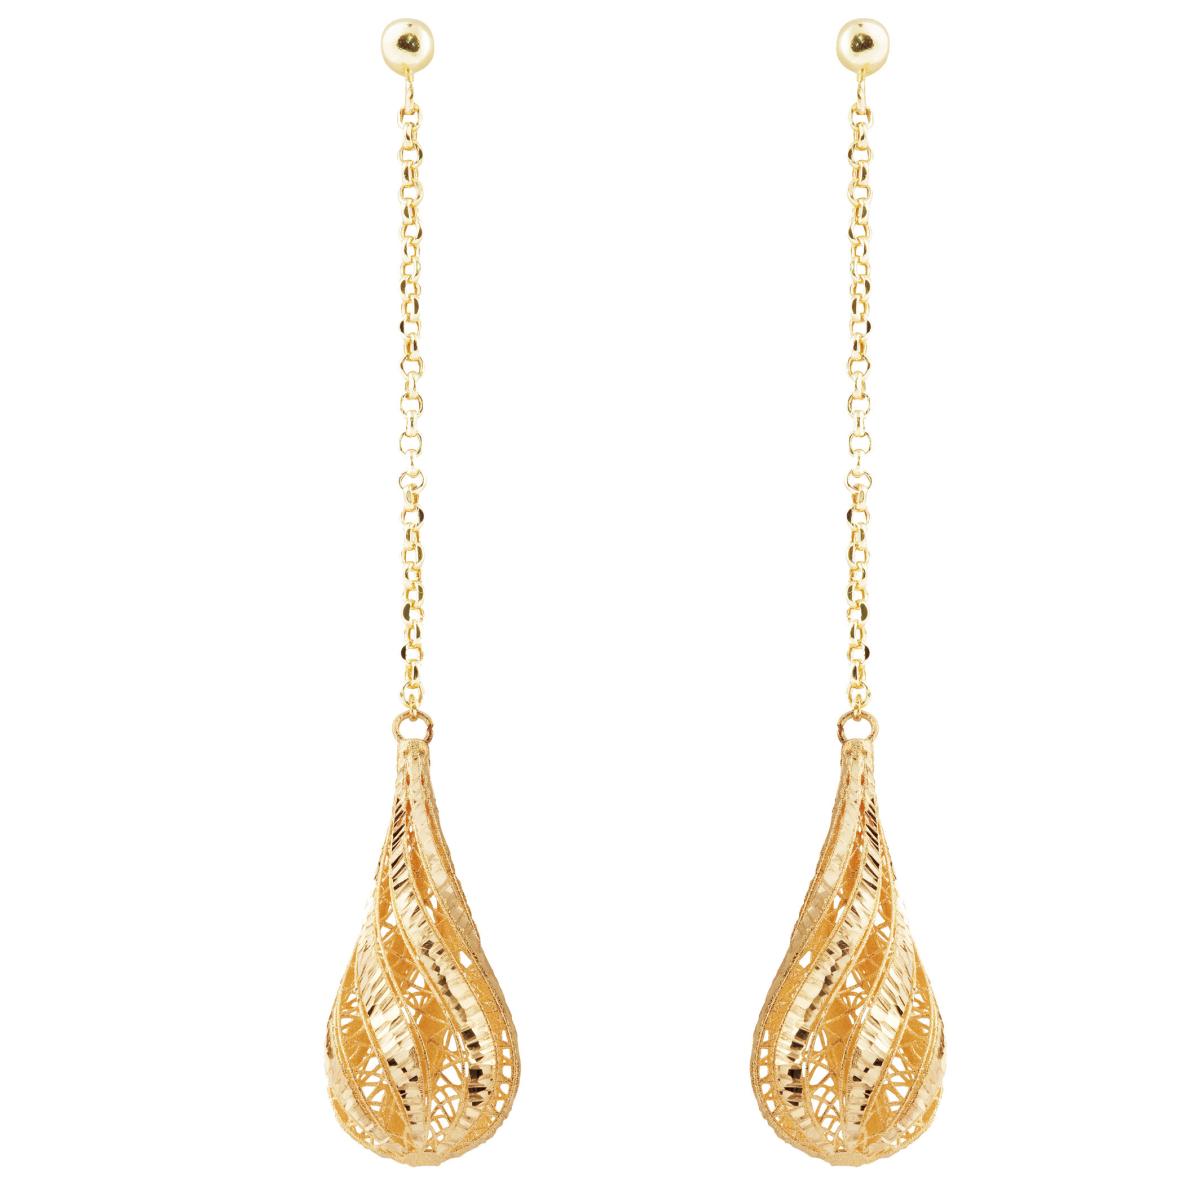 18kt shiny and satin yellow gold pendant earrings - OE4092-LG